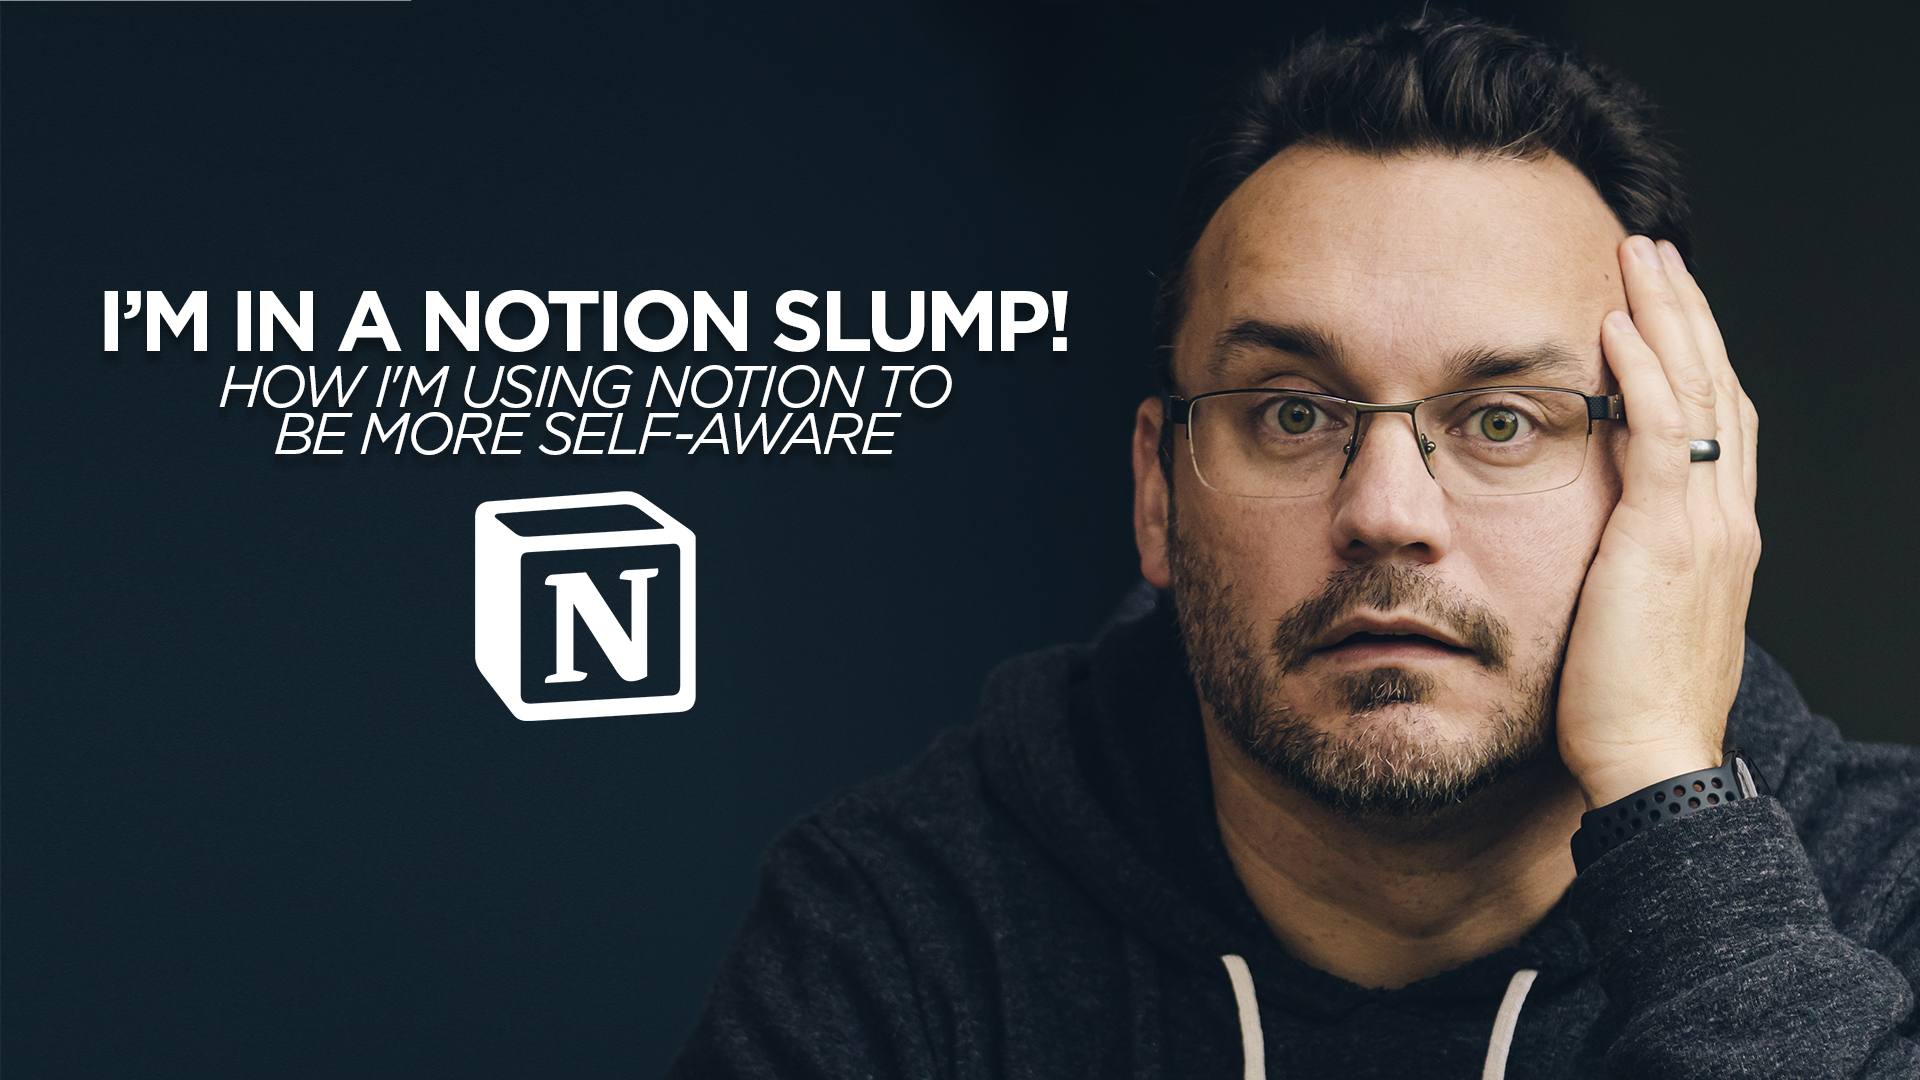 I'm in a Notion Slump - How I'm Using Notion to be more Self-Aware